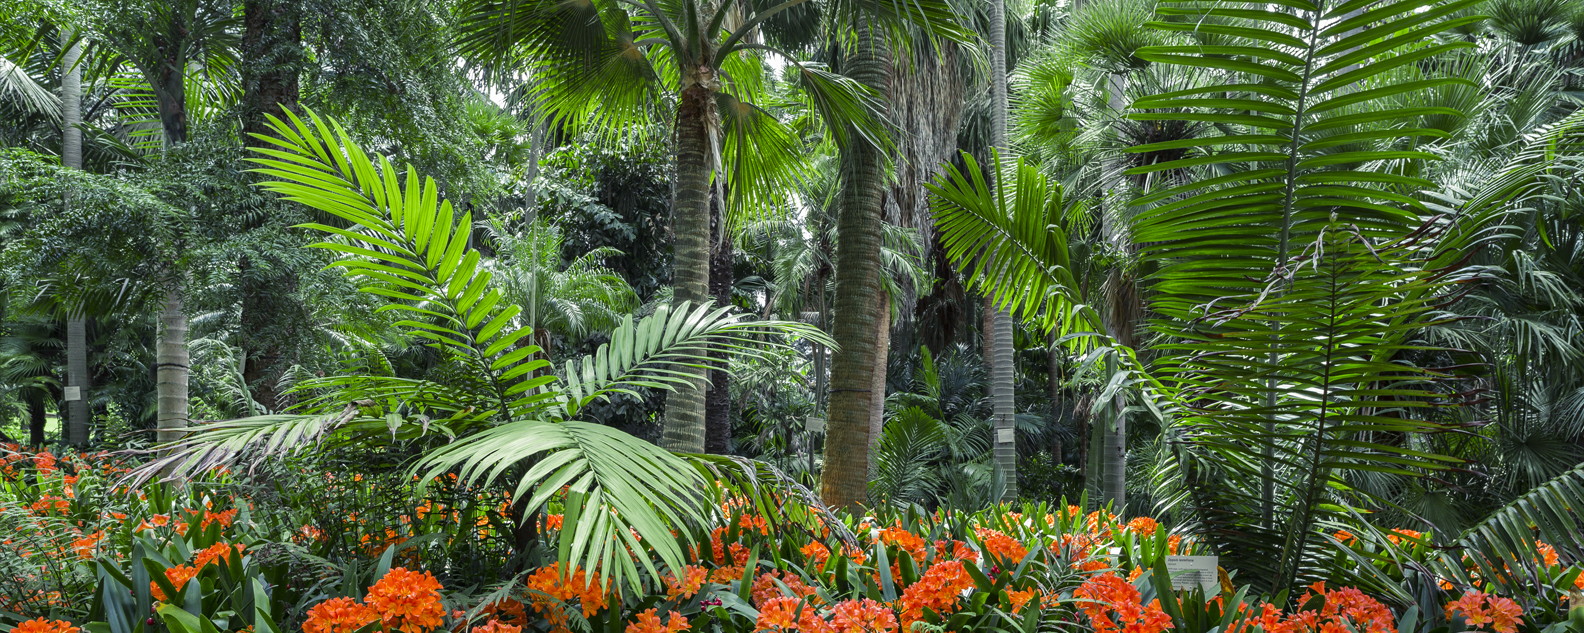 Grove of different species of Palm trees, with orange flowering cliveas growing in the undercanopy